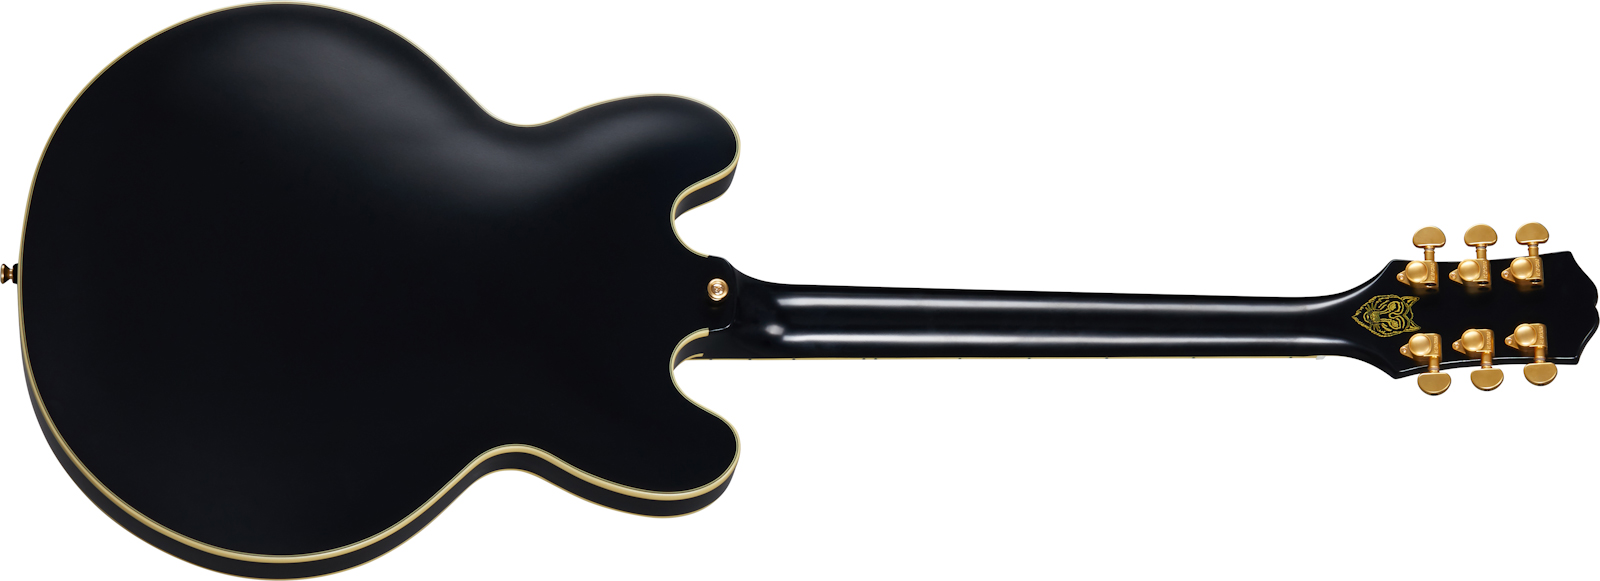 Epiphone Emily Wolfe Sheraton Stealth 2h Ht Lau - Black Aged - Semi-hollow electric guitar - Variation 1